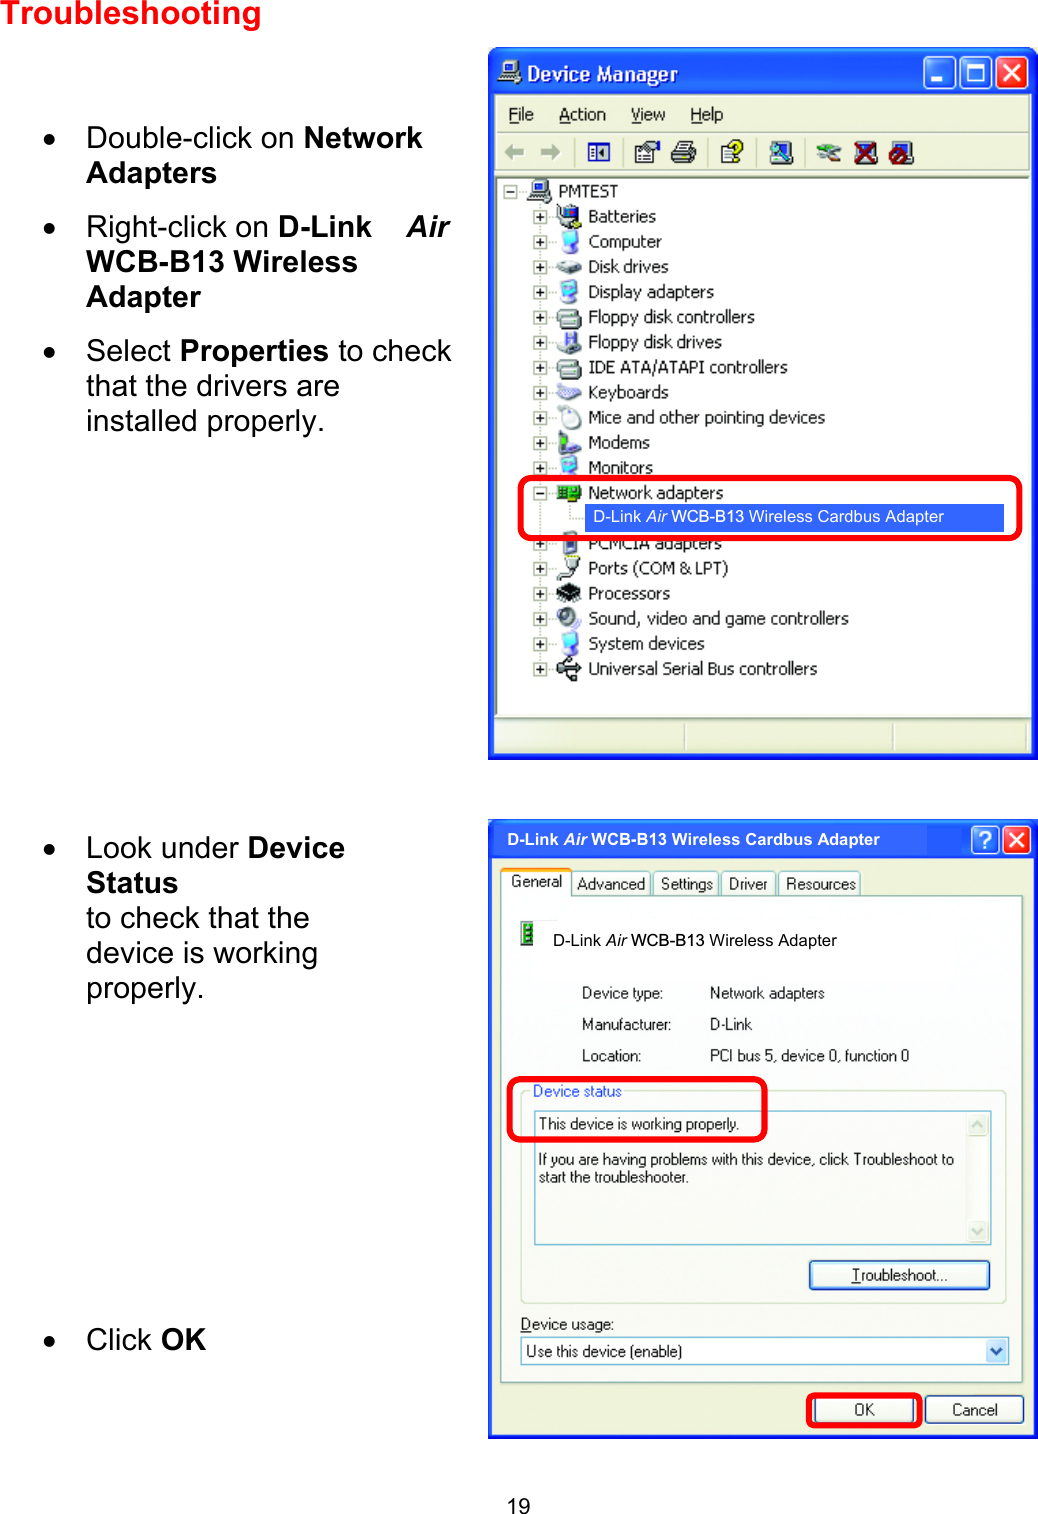  19Troubleshooting        •  Double-click on Network Adapters •  Right-click on D-Link    AirWCB-B13 Wireless Adapter •  Select Properties to check that the drivers are installed properly. •  Look under DeviceStatus to check that the device is working properly.           •  Click OK  D-Link Air WCB-B13 Wireless Cardbus Adapter D-Link Air WCB-B13 Wireless Adapter D-Link Air WCB-B13 Wireless Cardbus Adapter 